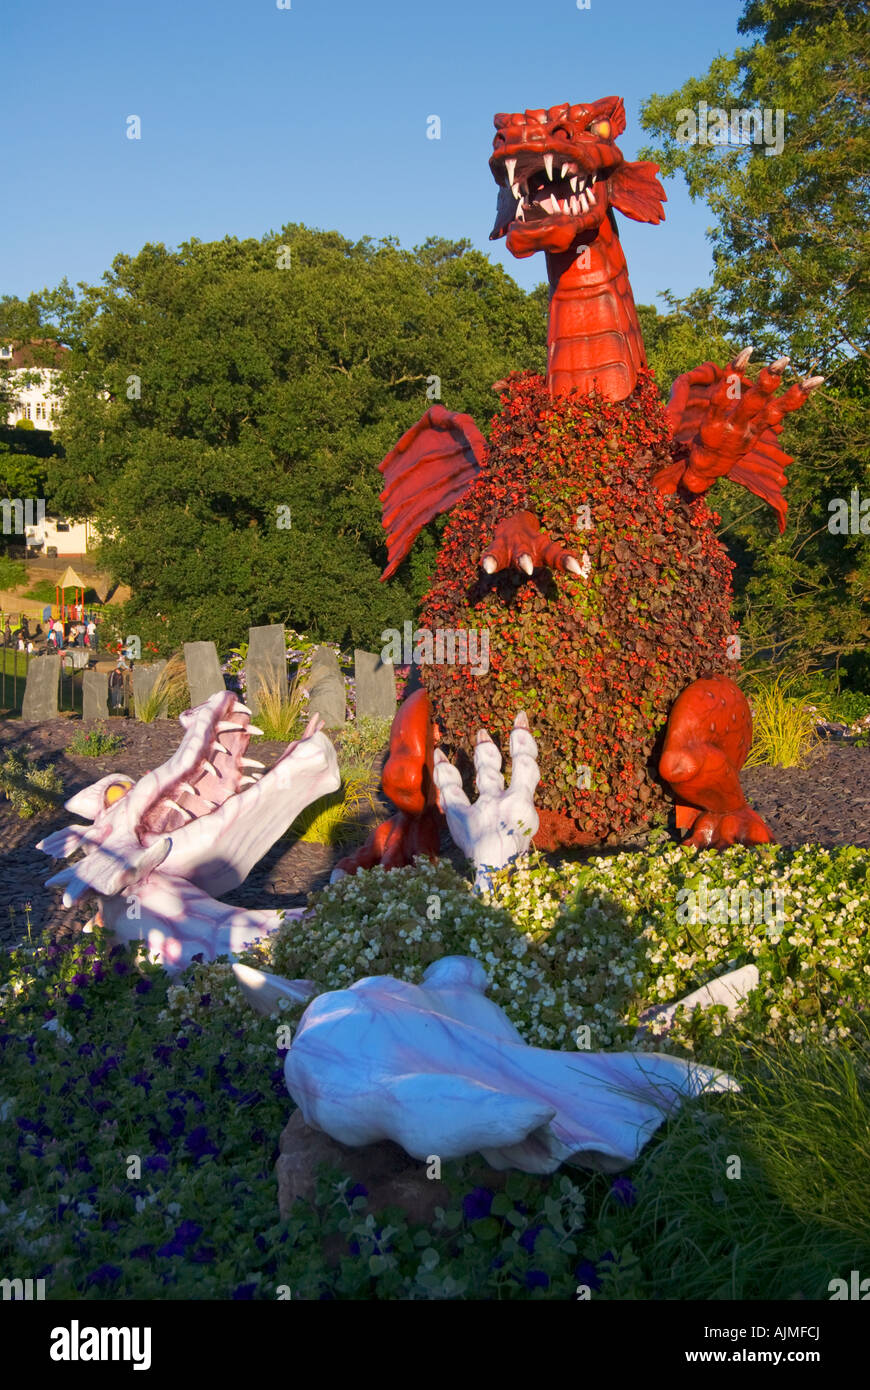 red dragon kills white dragon in a flower bed in the park Stock Photo